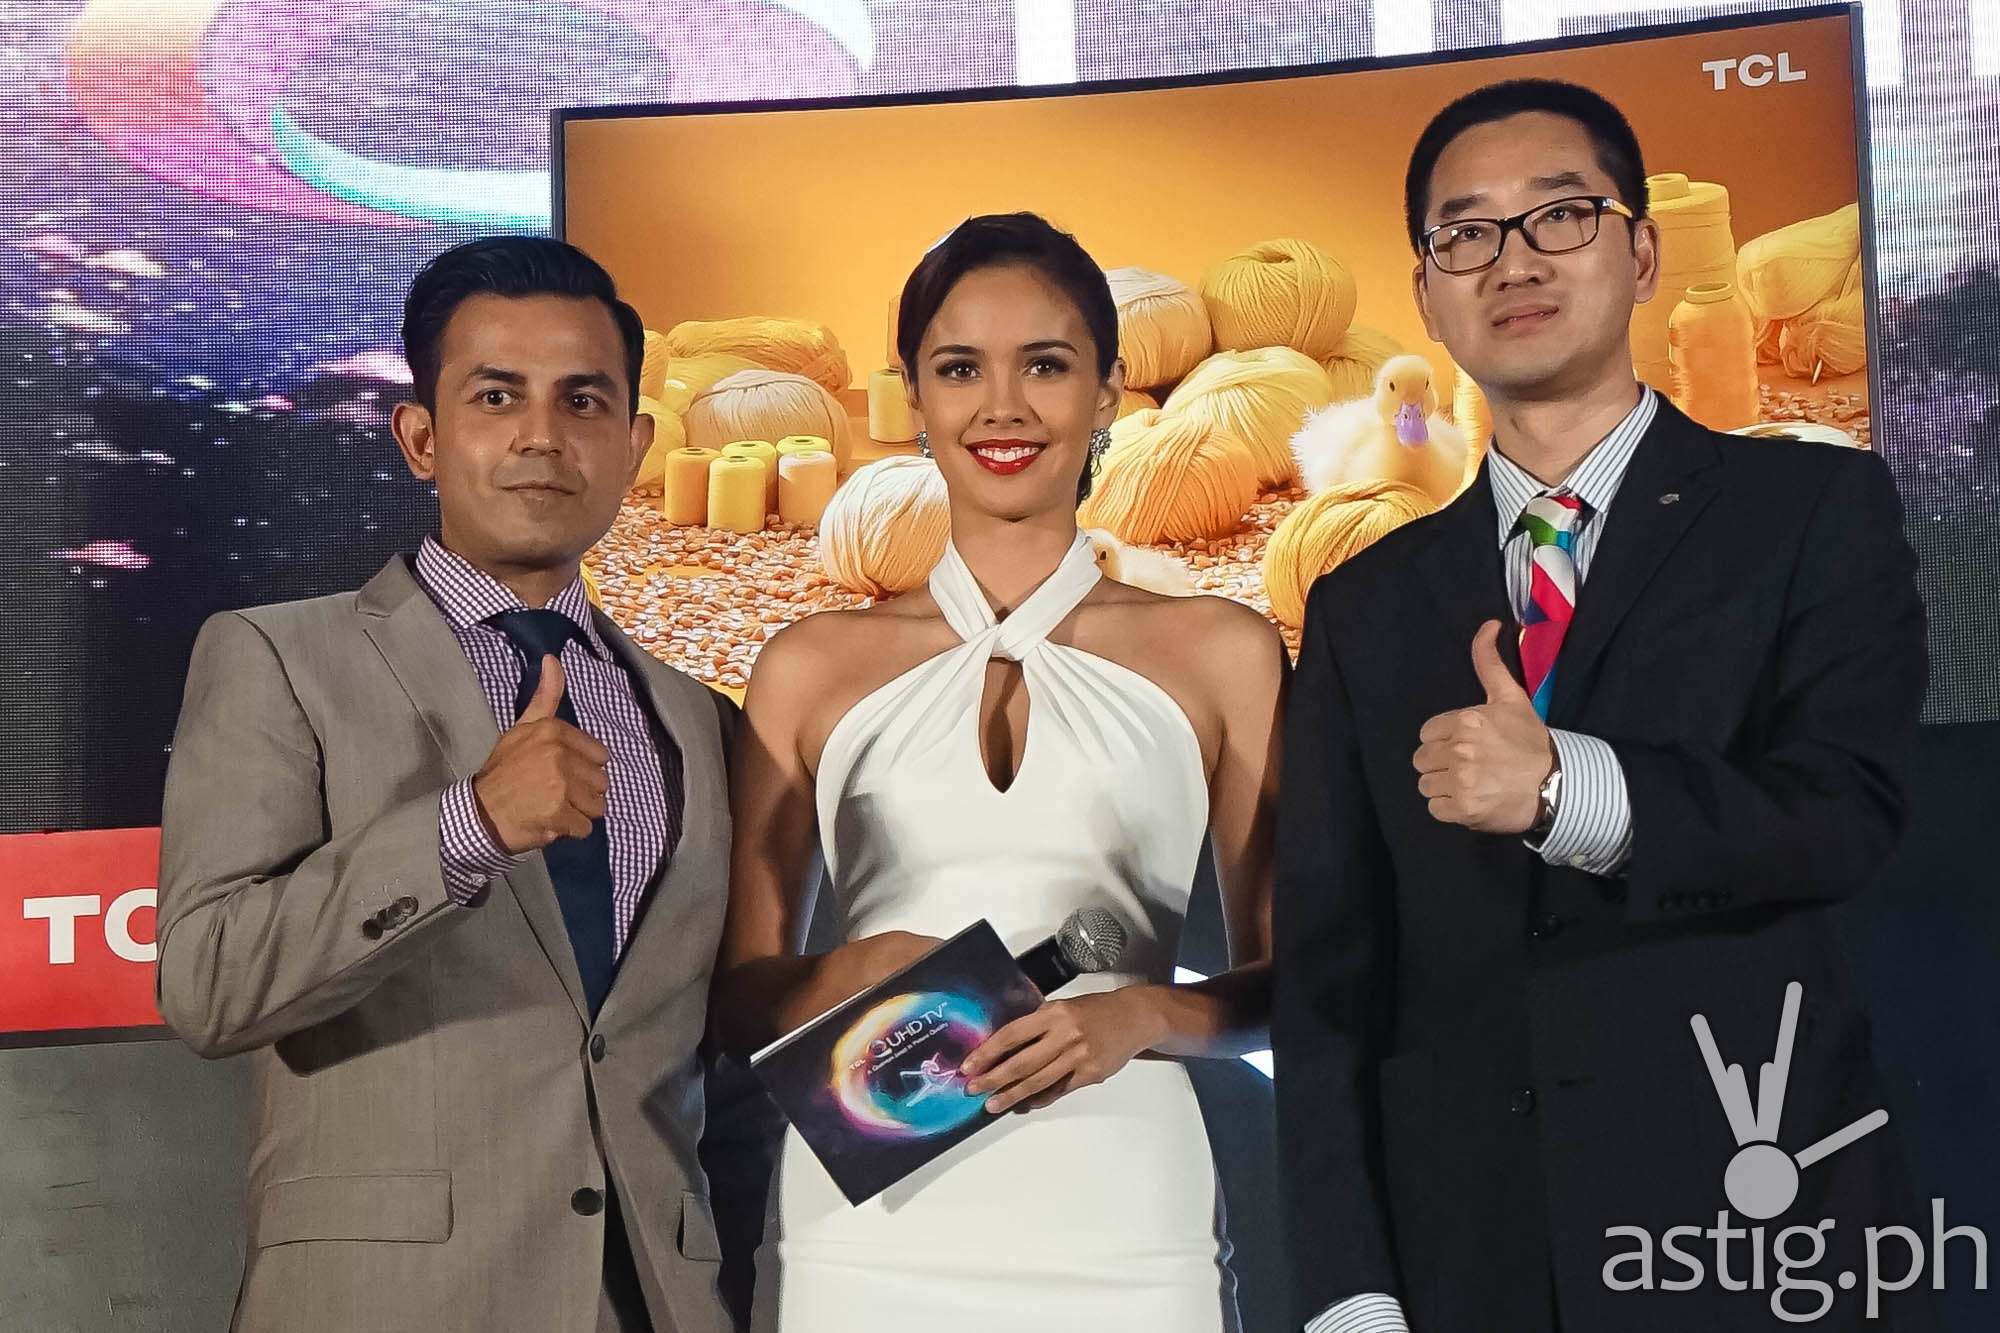 Mr. Ranjit Gopi, TCL OBC Marketing Director, Mr. Eason Cai, TCL Philippines CEO and Megan Young